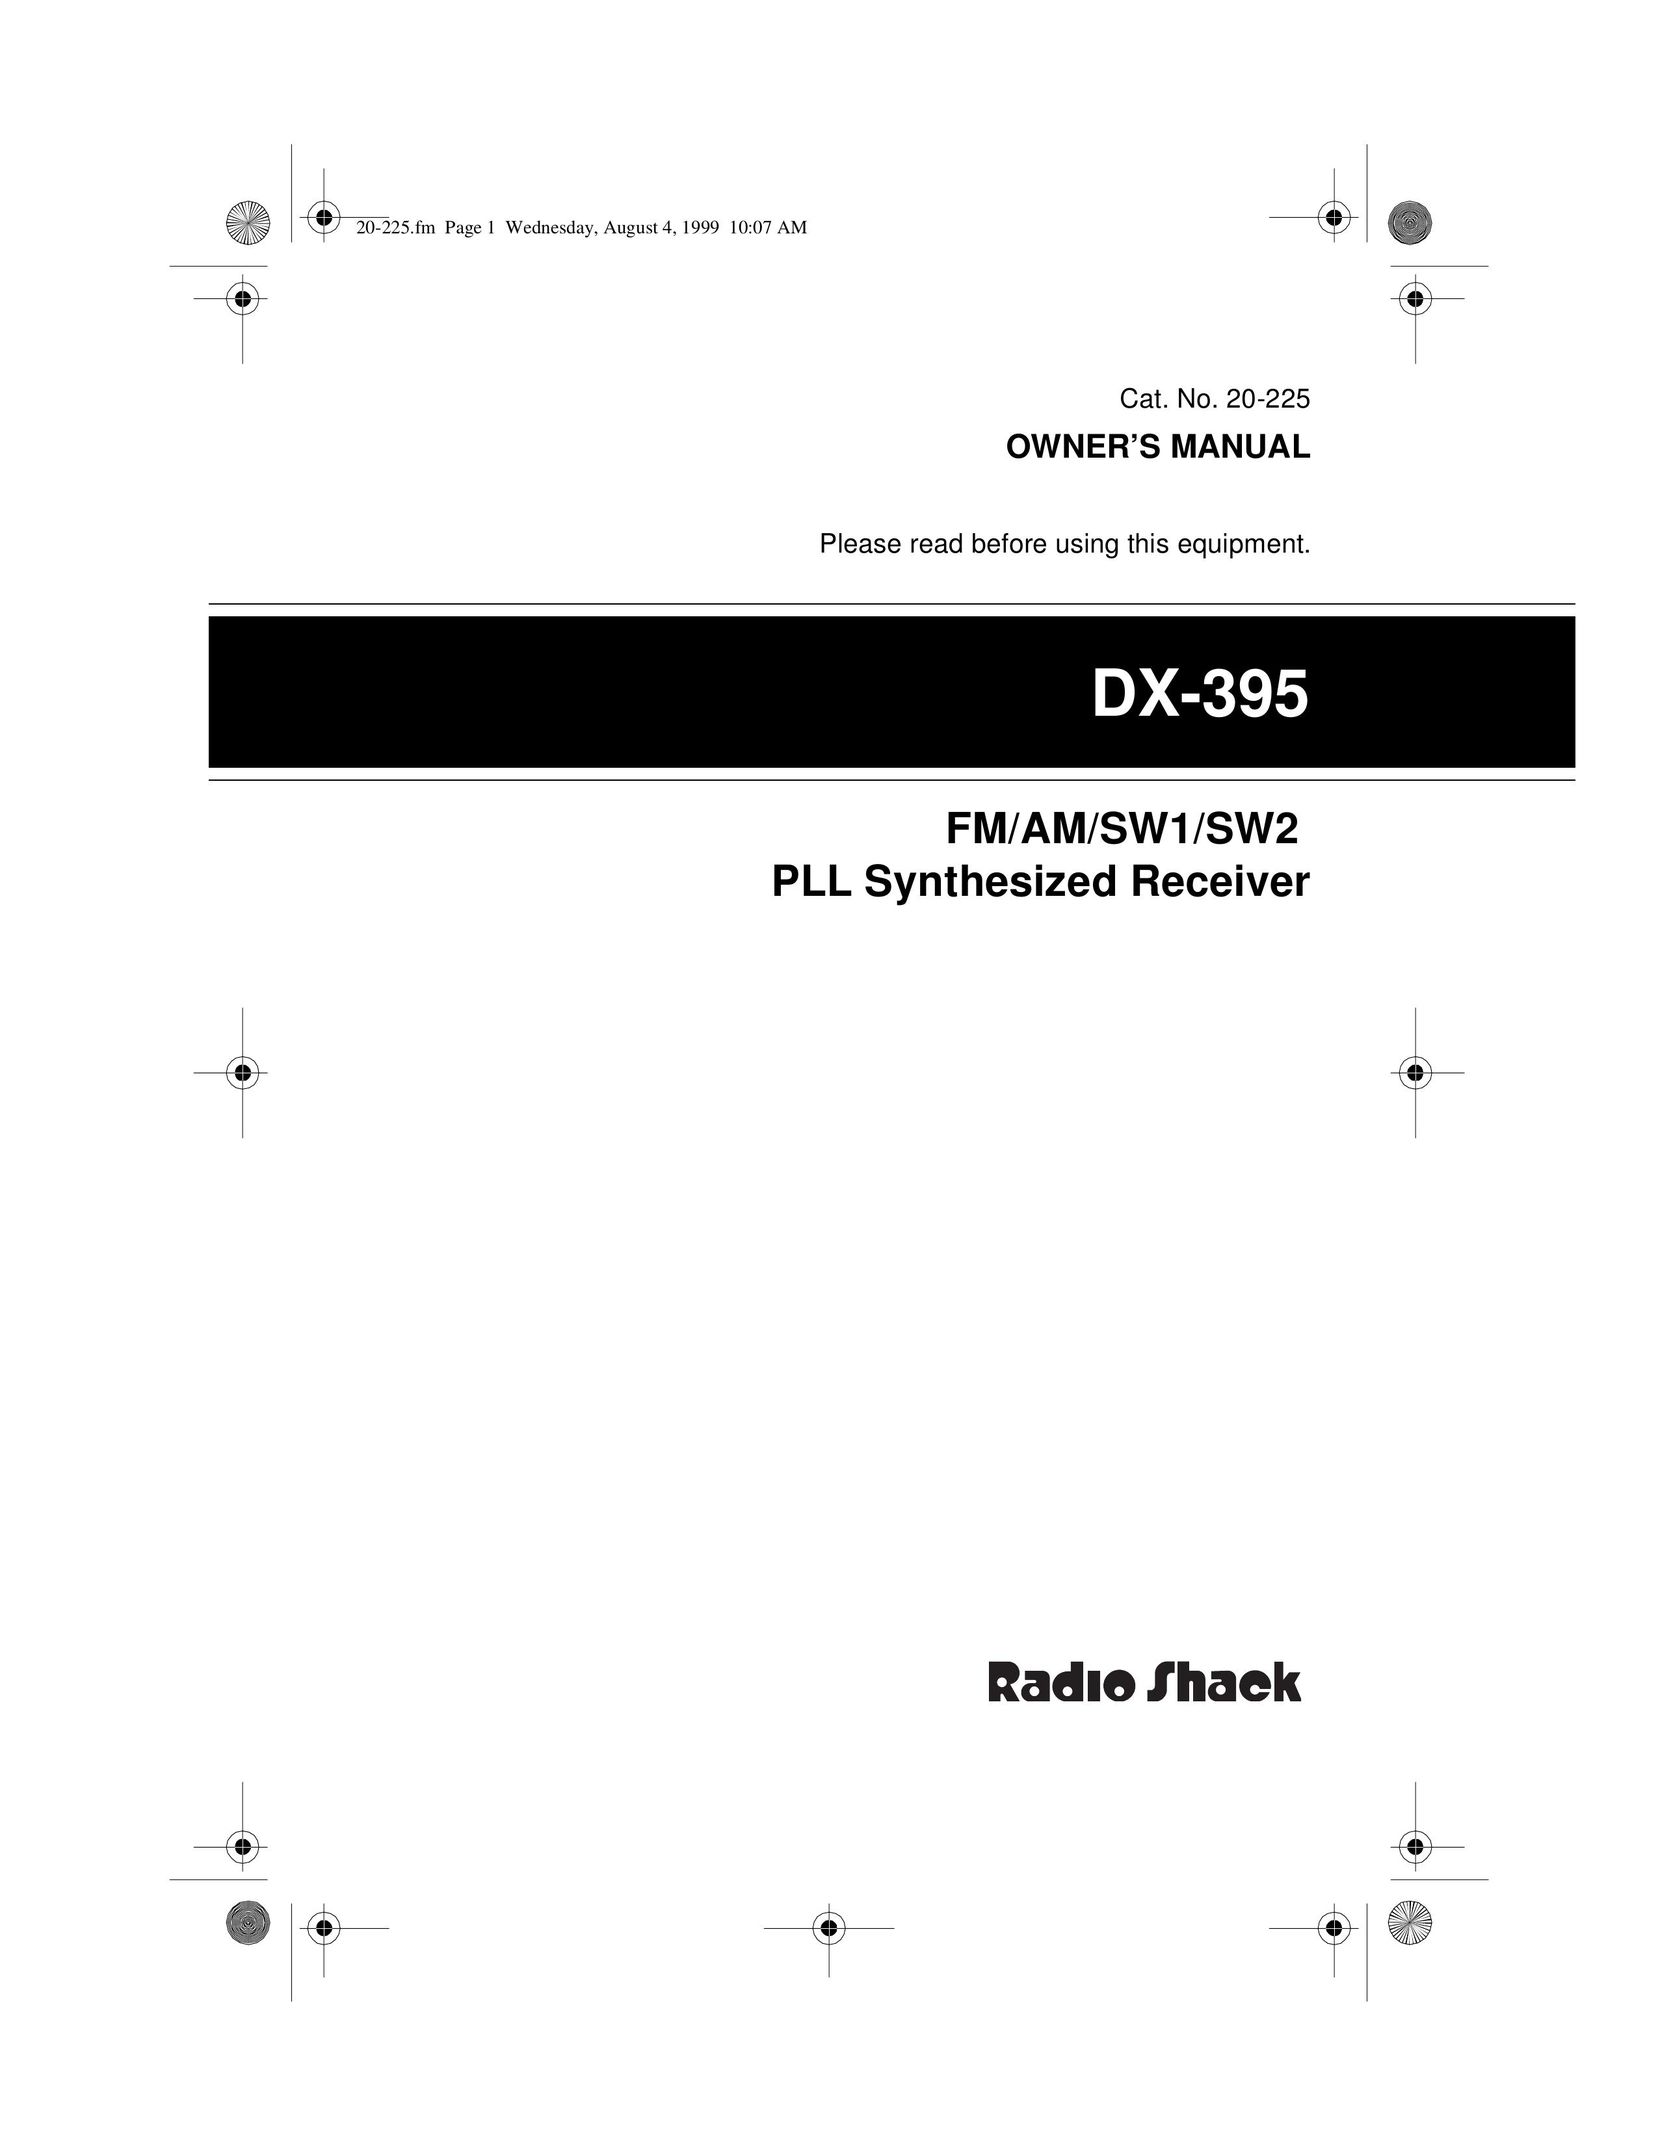 Radio Shack DX-395 Stereo Receiver User Manual